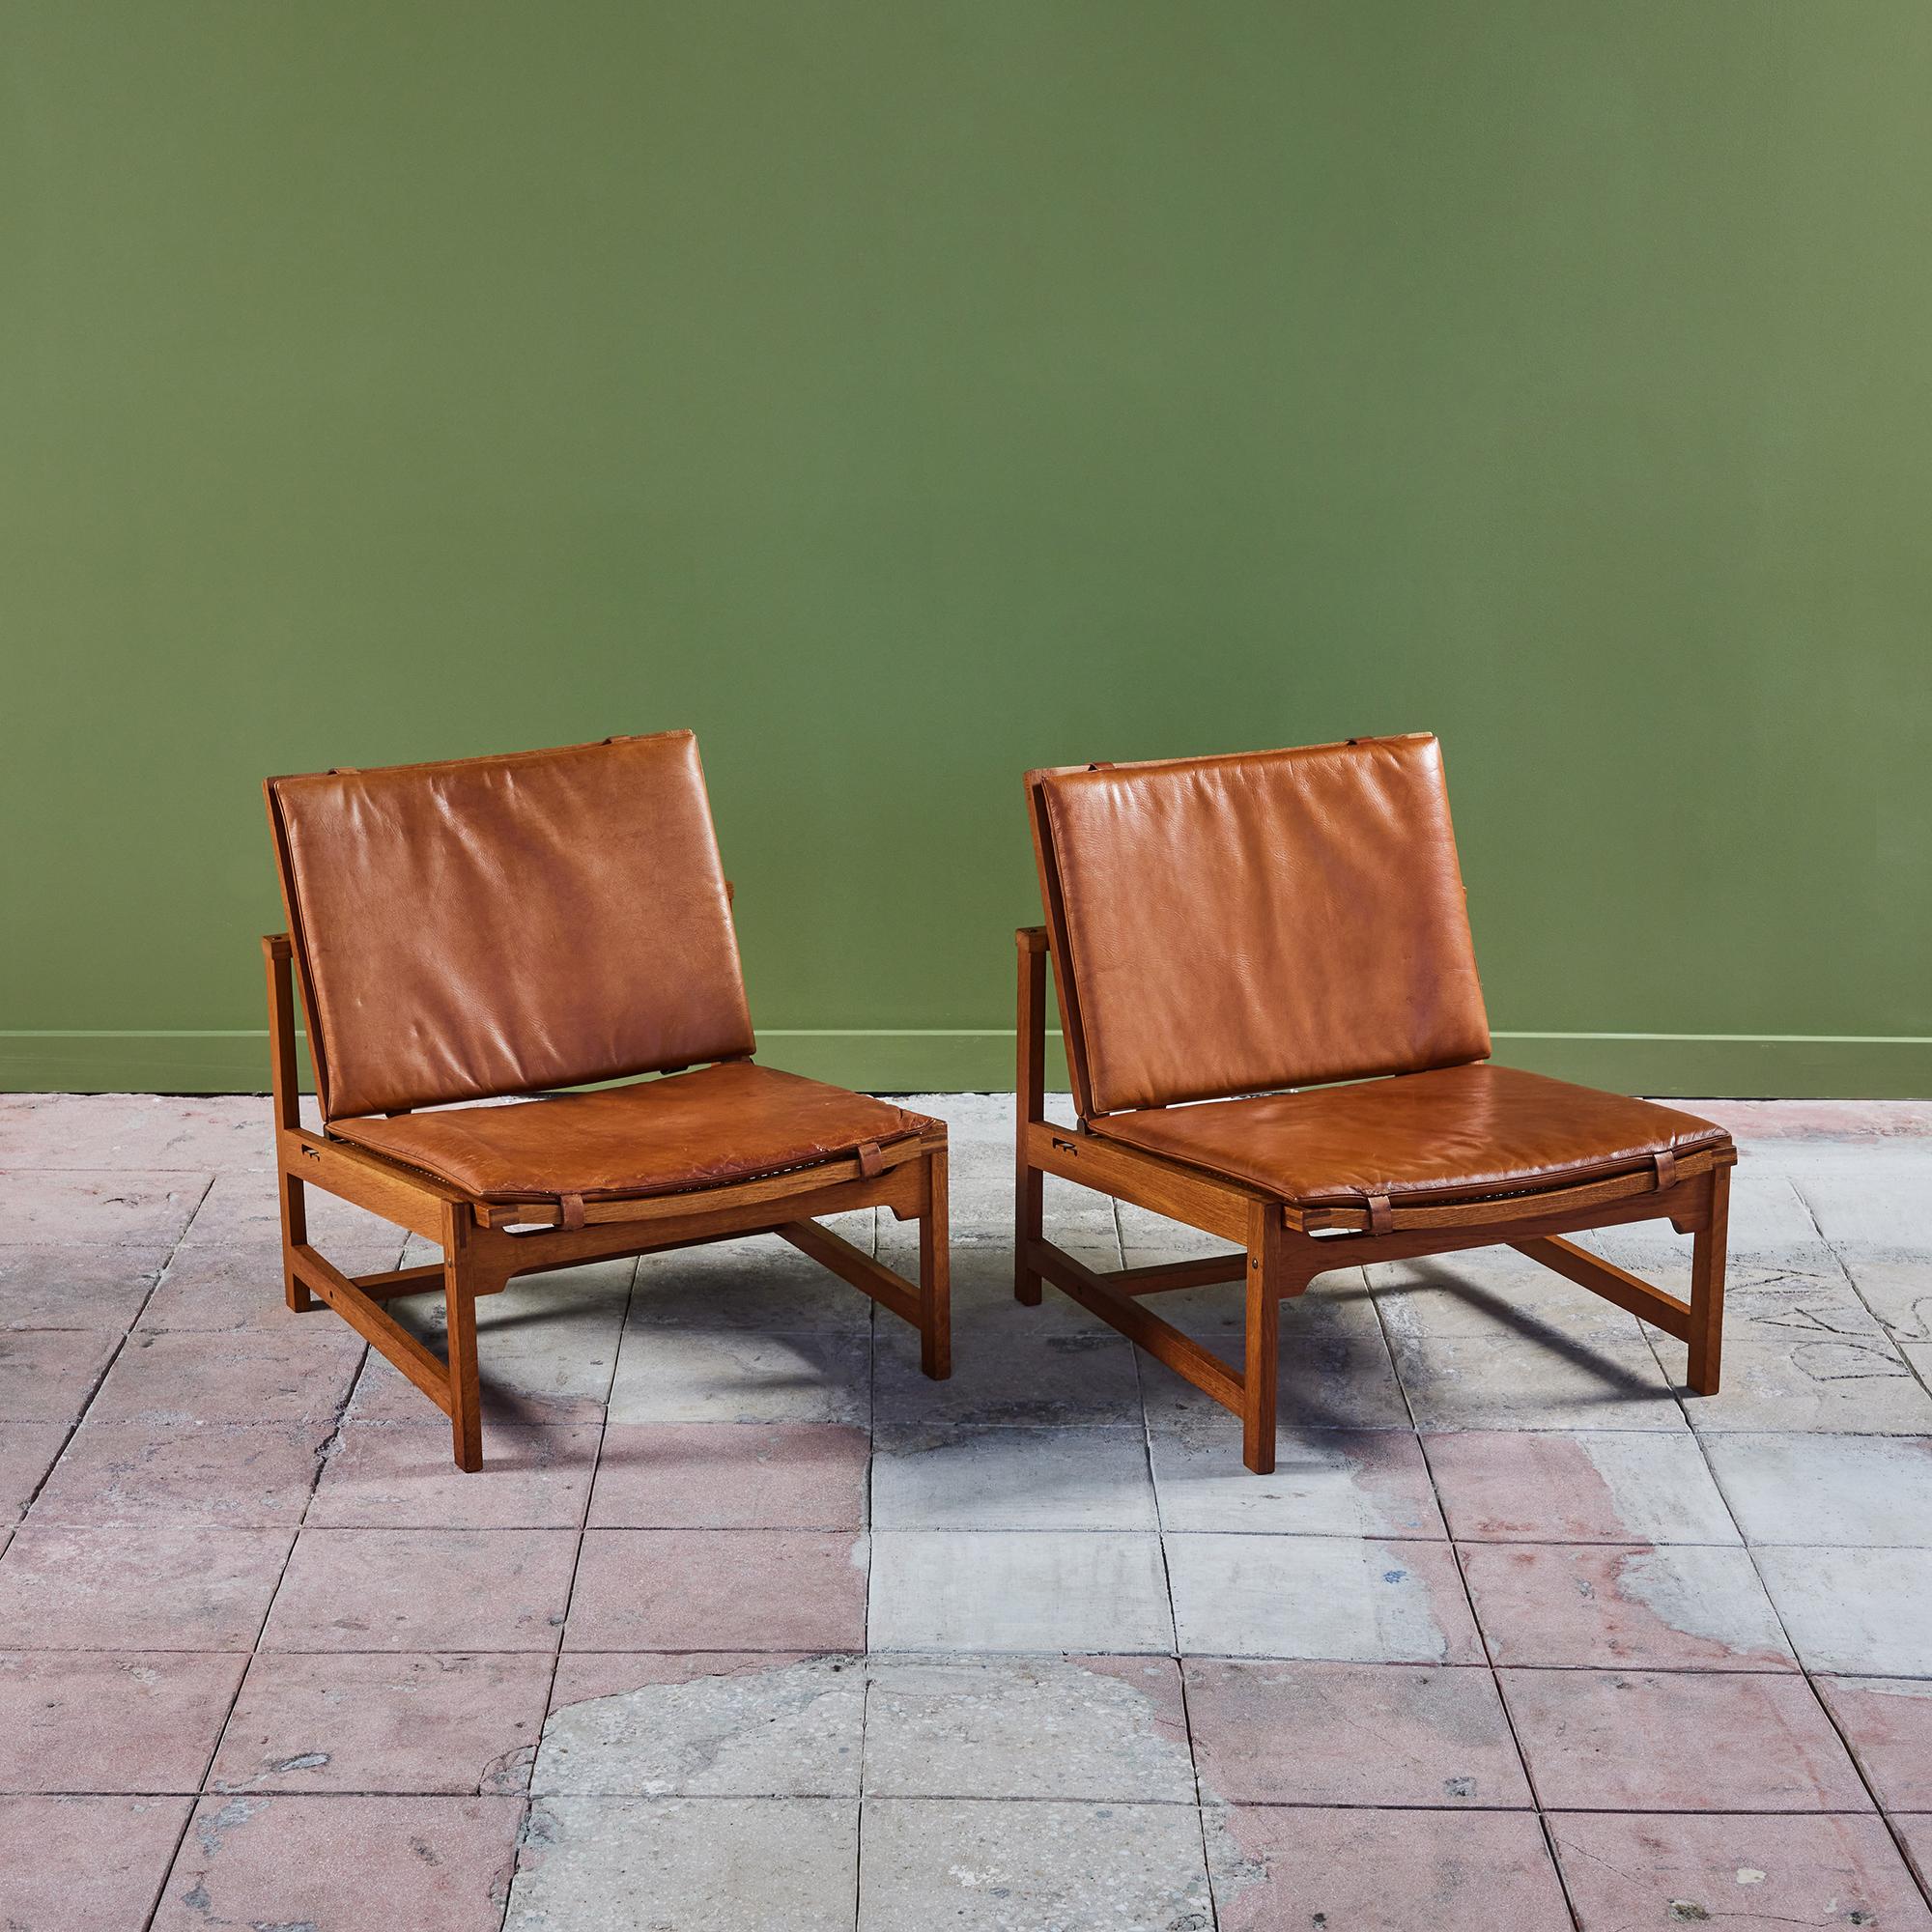 Rare pair of oak and leather lounge chairs by Arne Karlsen and Peter Hjort, for Interna, c.1960s. These chairs feature adjustable seat backs and an oak frame. The cane seat and seat backs both have the original cognac leather